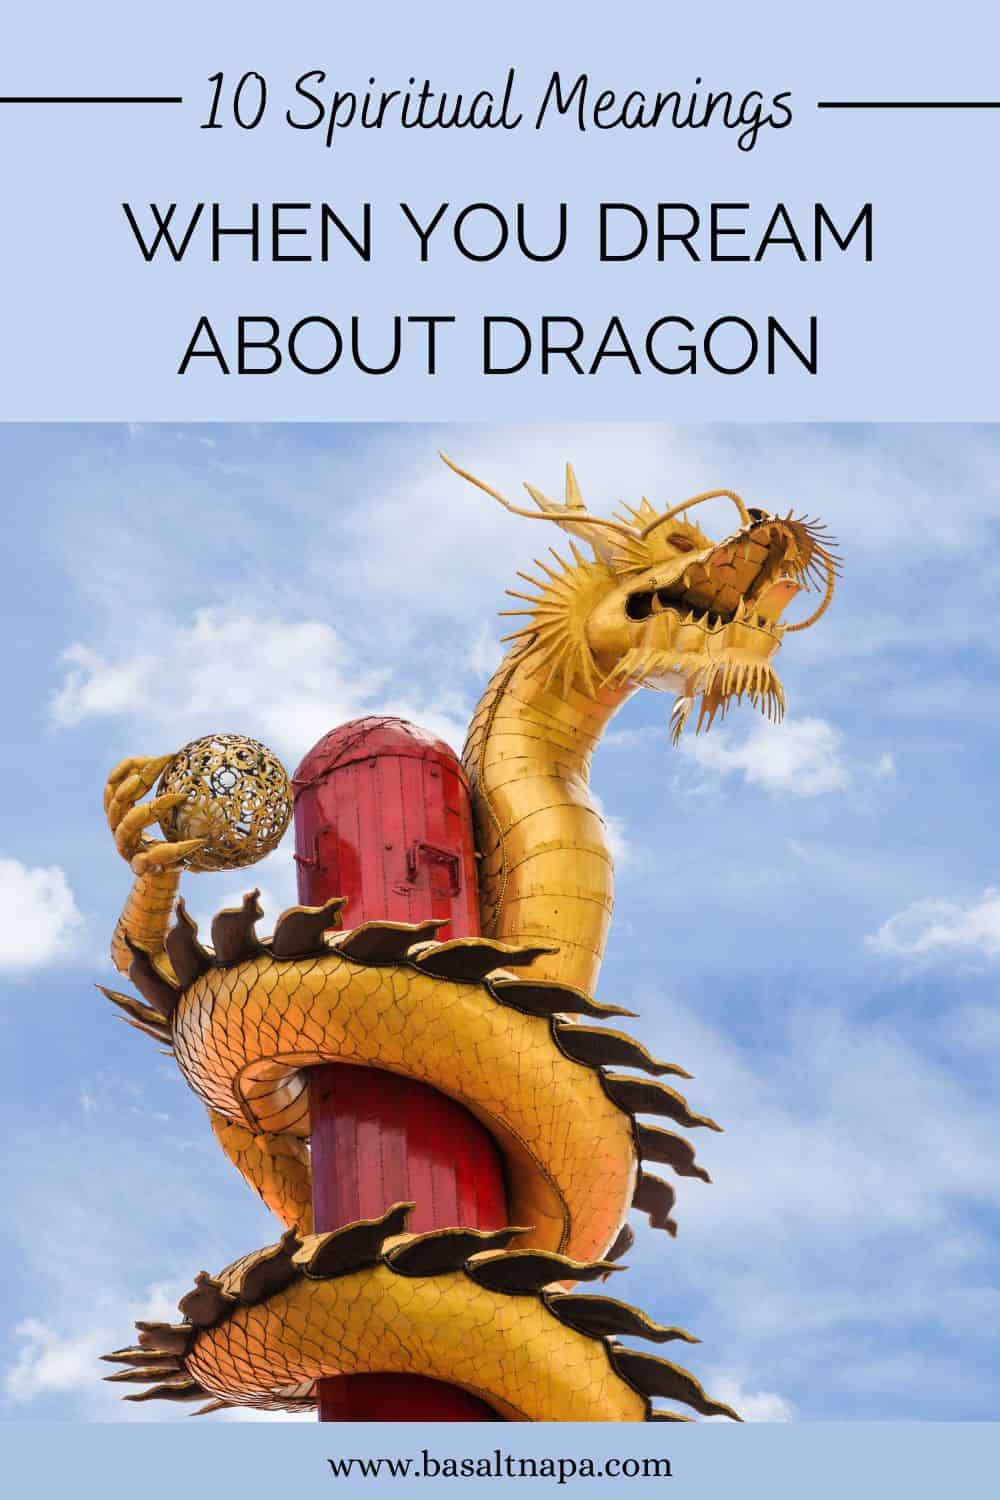 What Does It Mean When You Dream about a Dragon